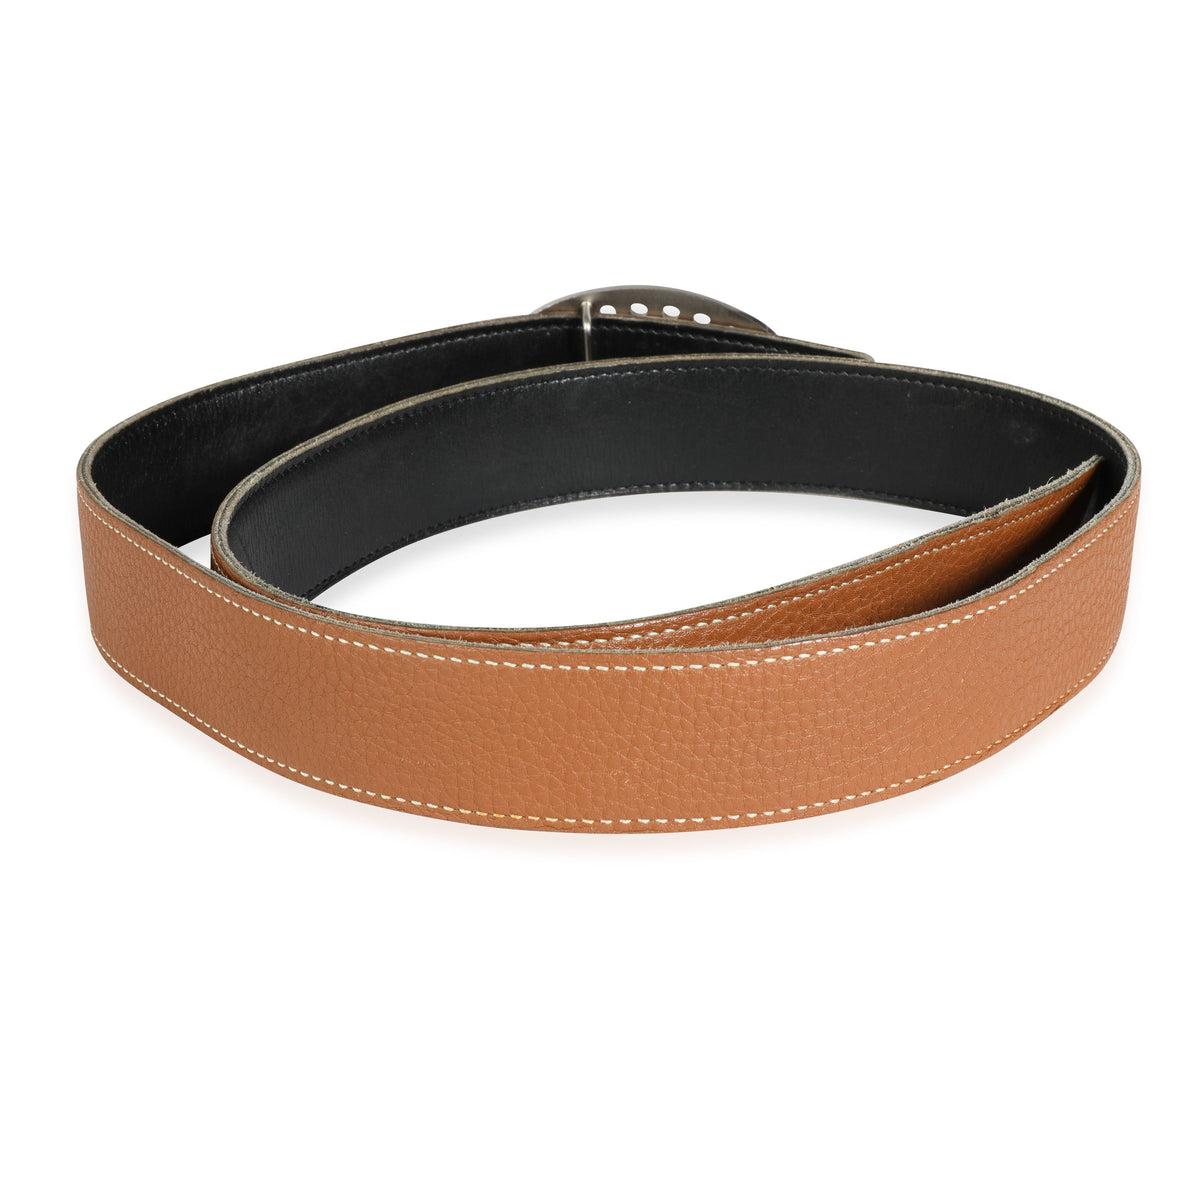 Hermes Gold Black Leather PHW Mirage Reversible Belt 90. Features silver hardware, and a gold and black reversible leather interior and exterior.

77268MSC